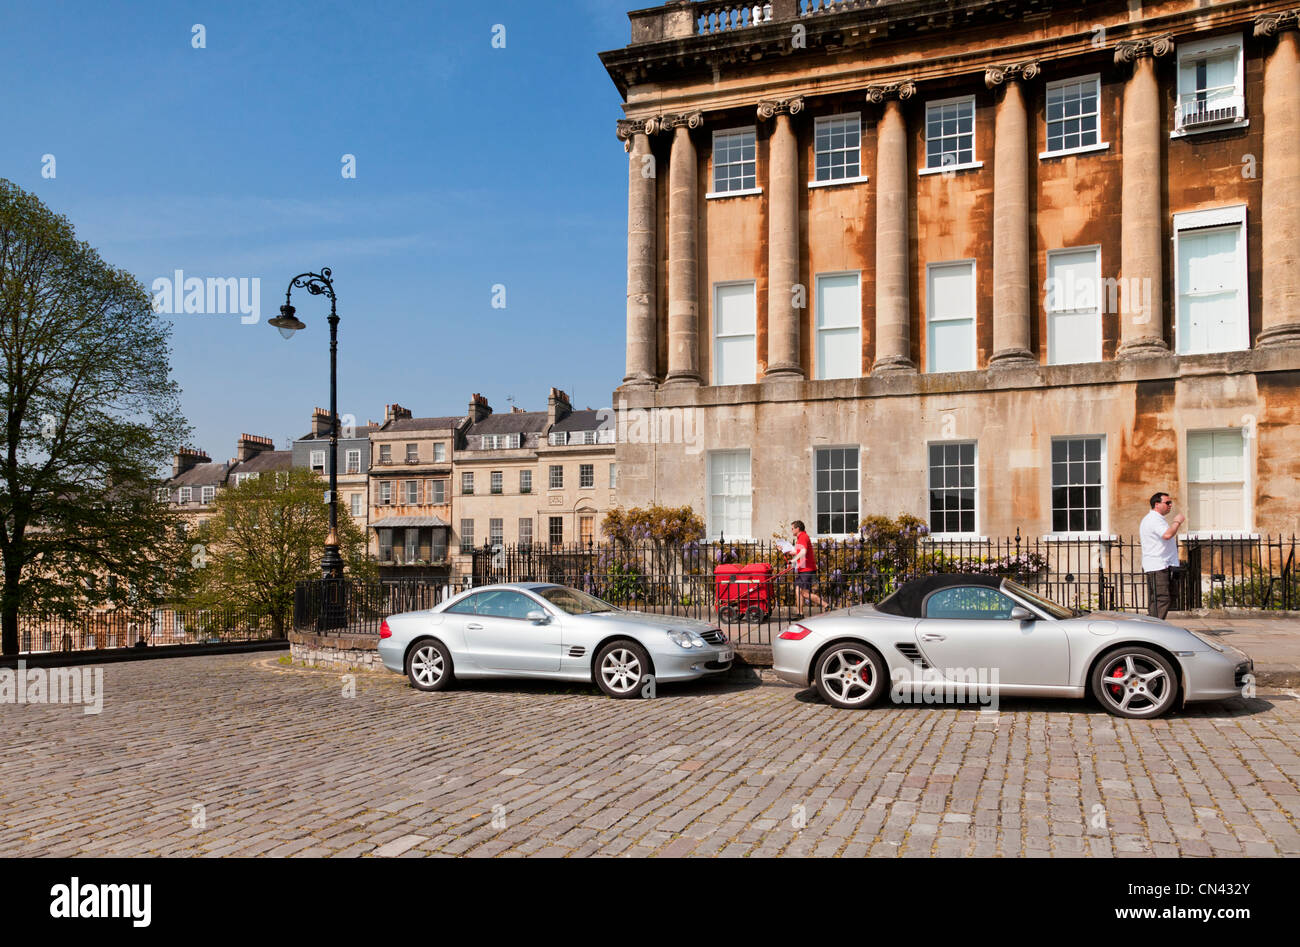 A Porsche and a Mercedes parked in Royal Crescent, Bath, Somerset, England. Postman just passing by. Stock Photo